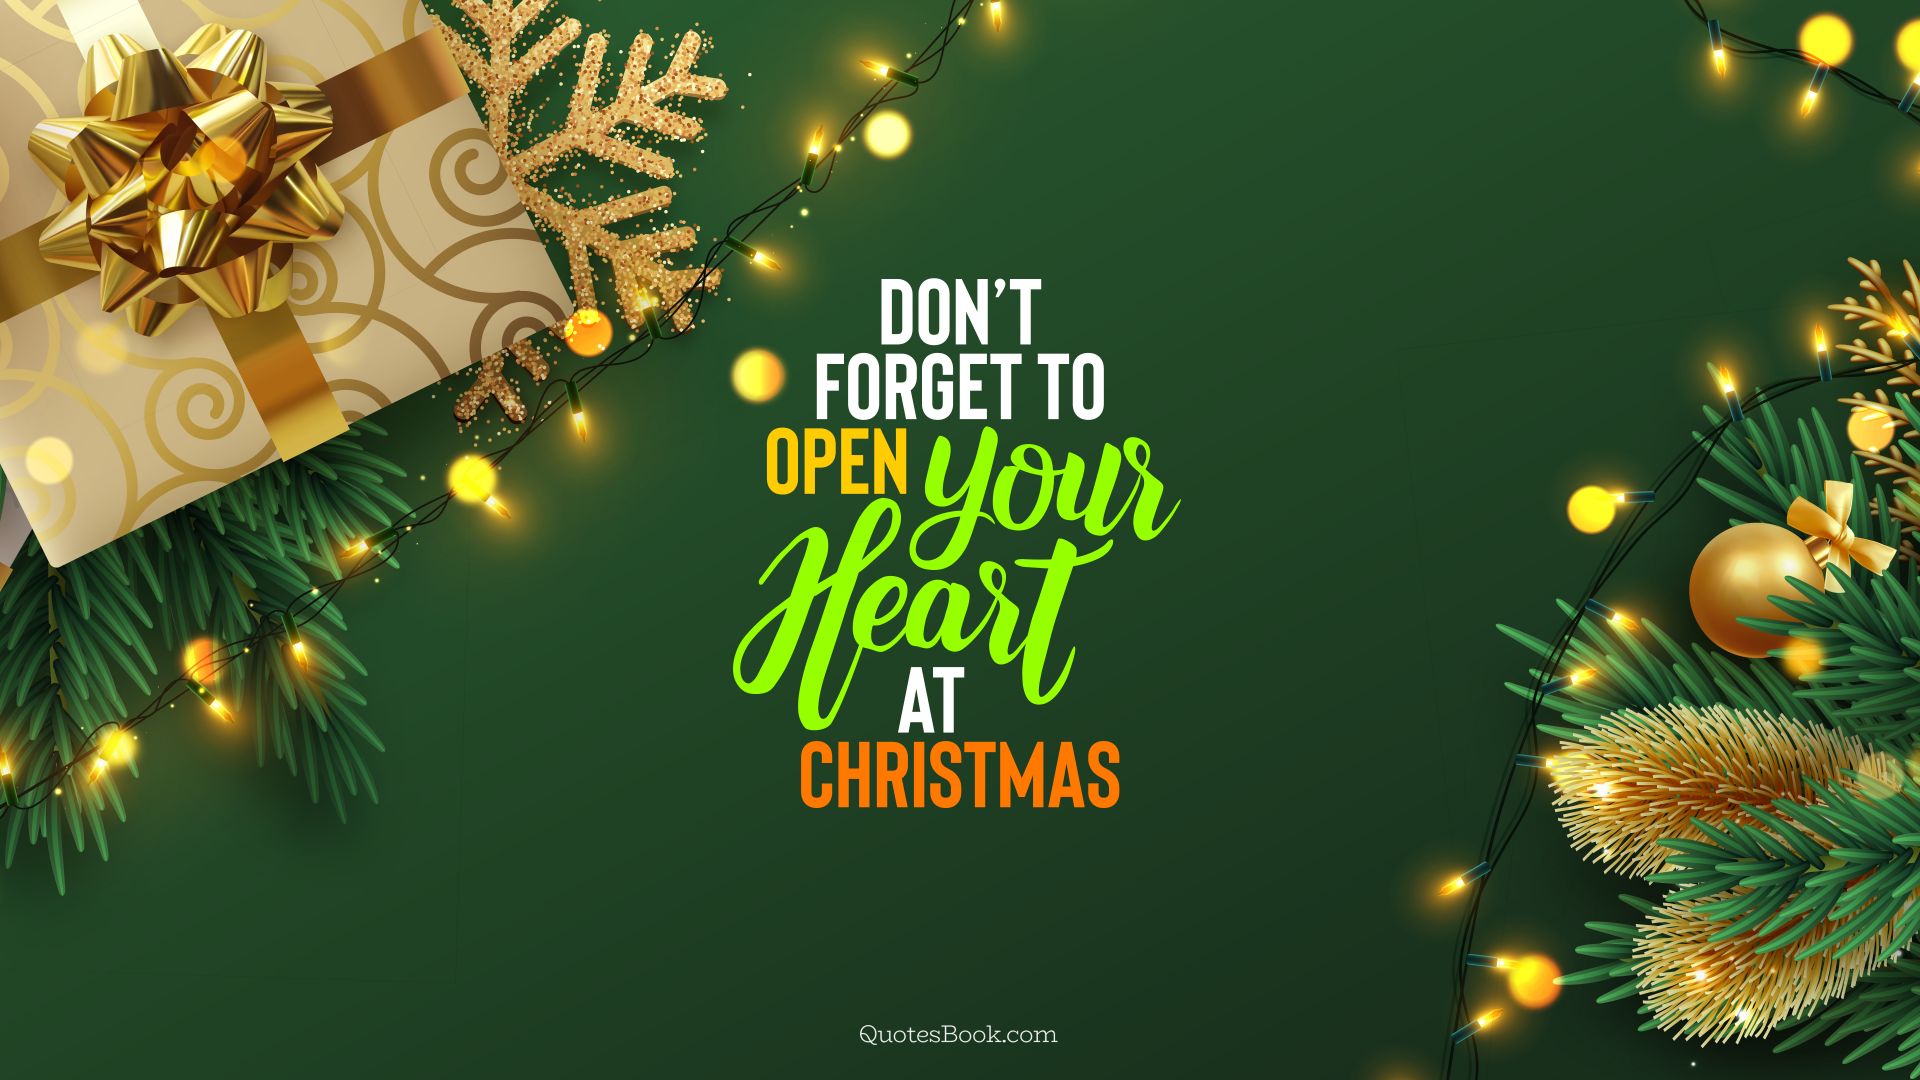 Don’t forget to open your heart at Christmas. - Quote by QuotesBook